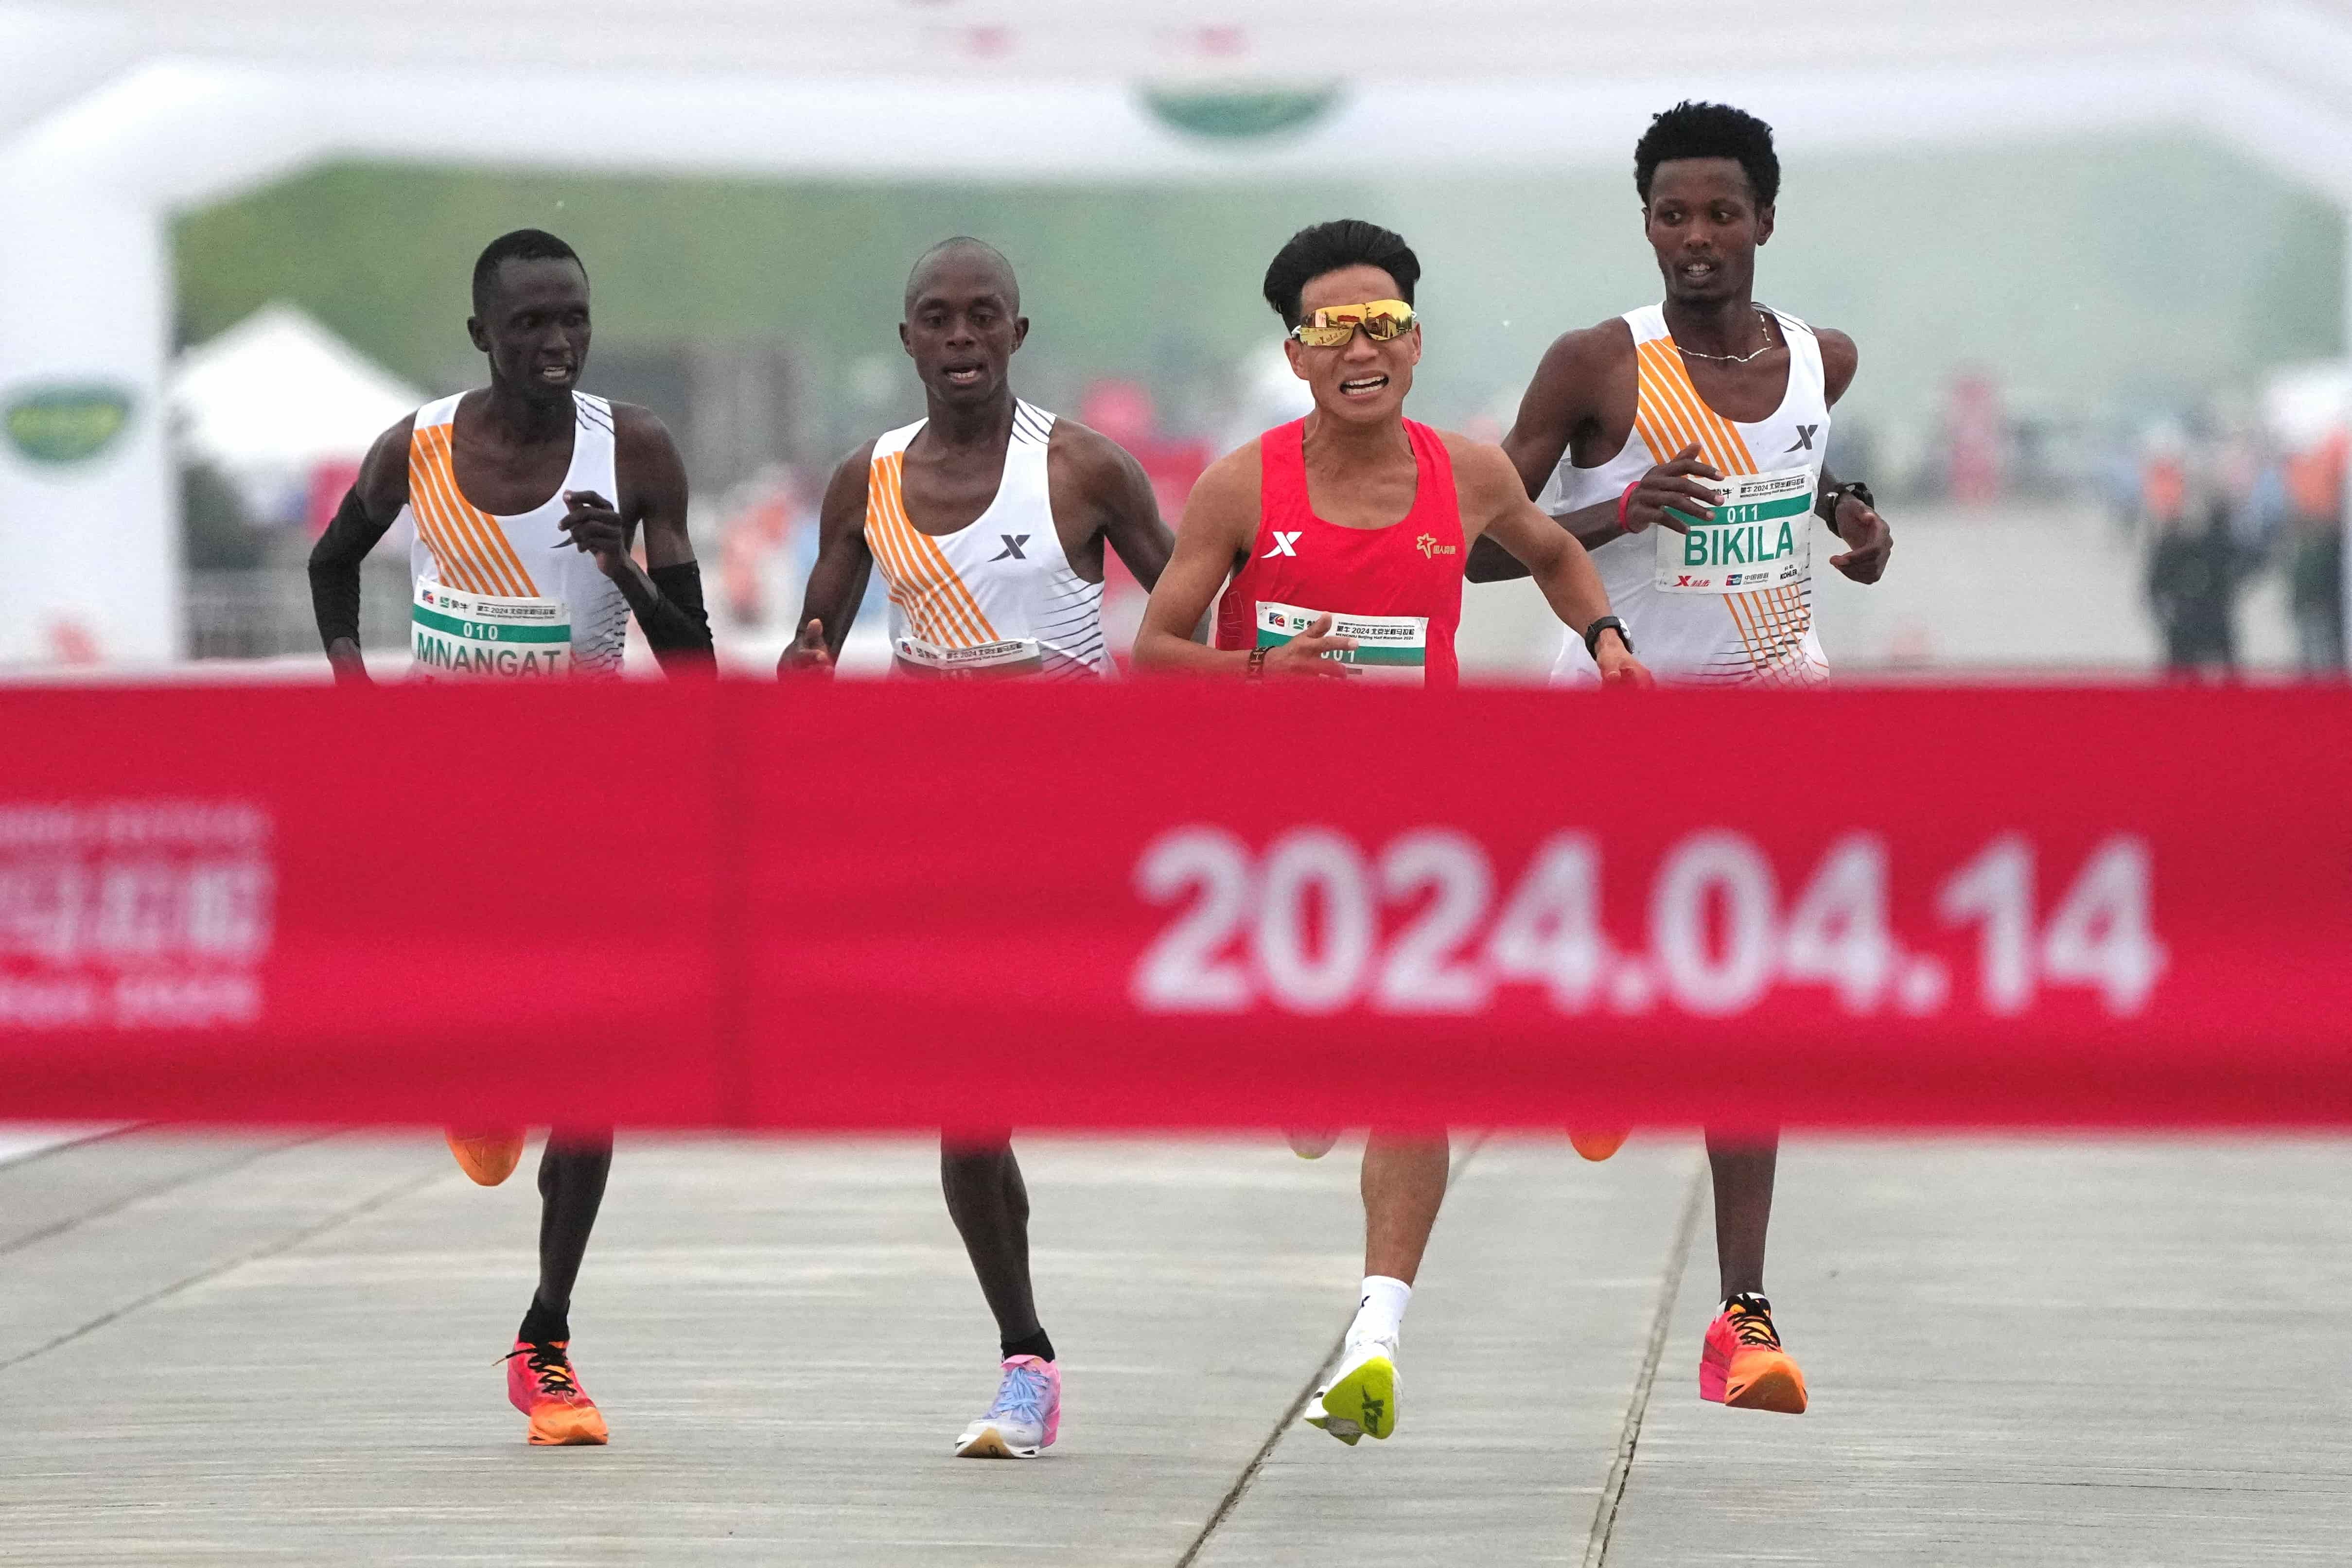 Beijing Half Marathon winners lose medals in aftermath of disputed finish